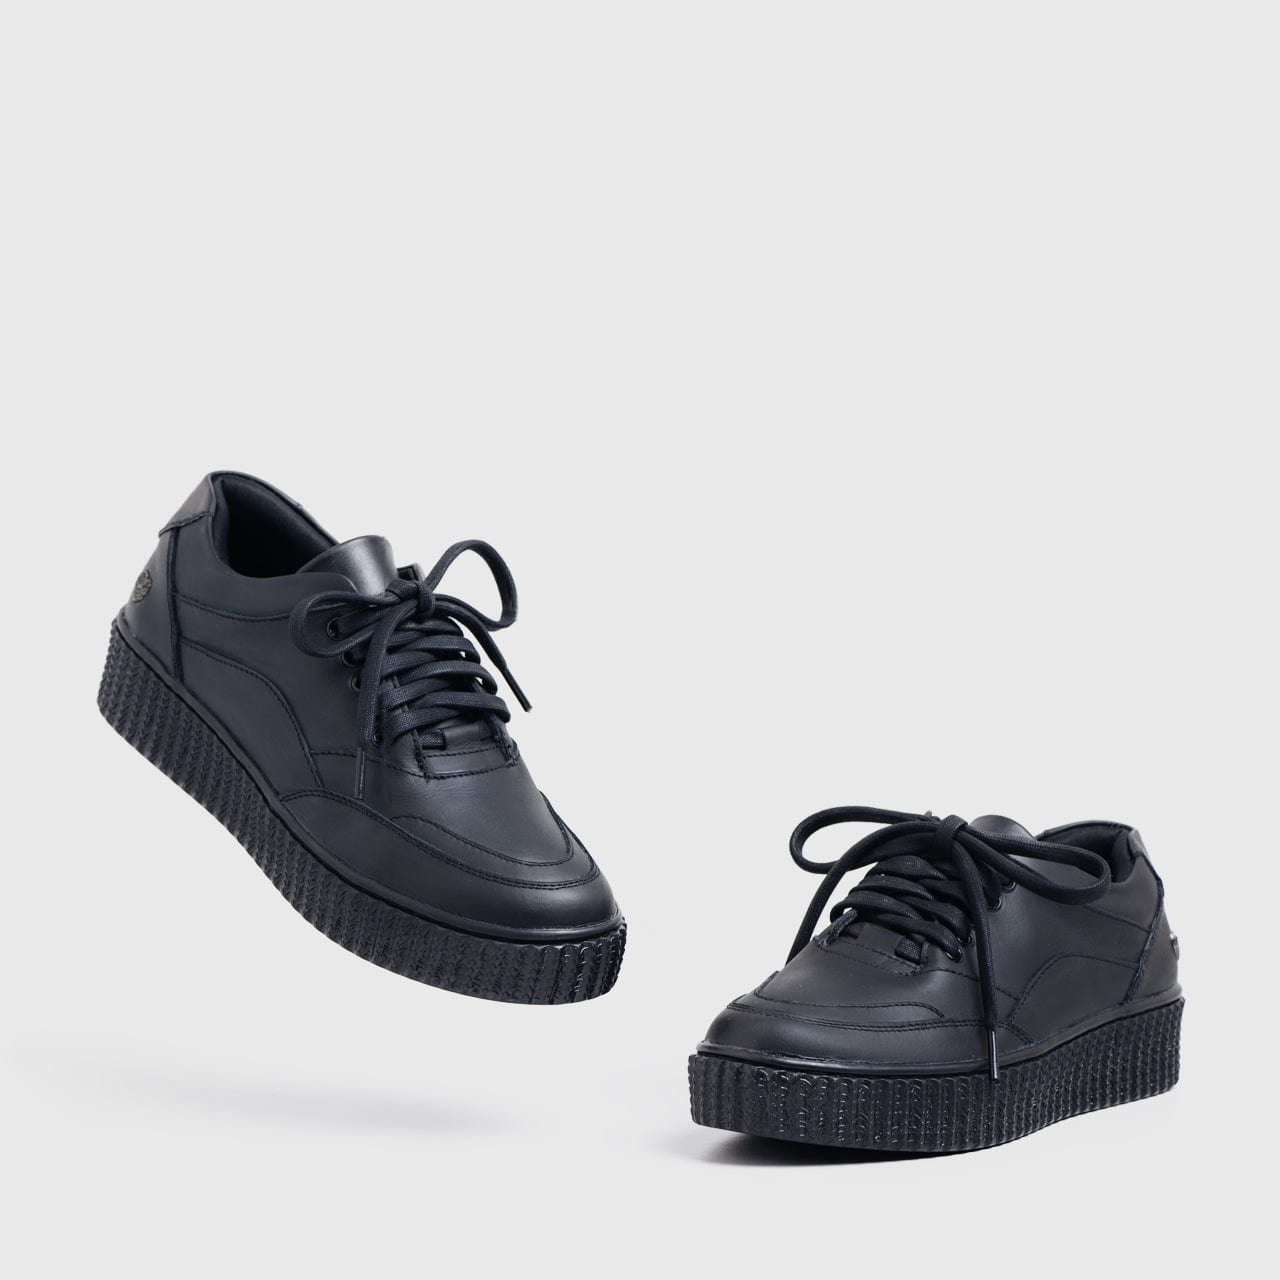 Adorable Projects Official Adorableprojects - Medalion Sneakers Genuine Leather Black